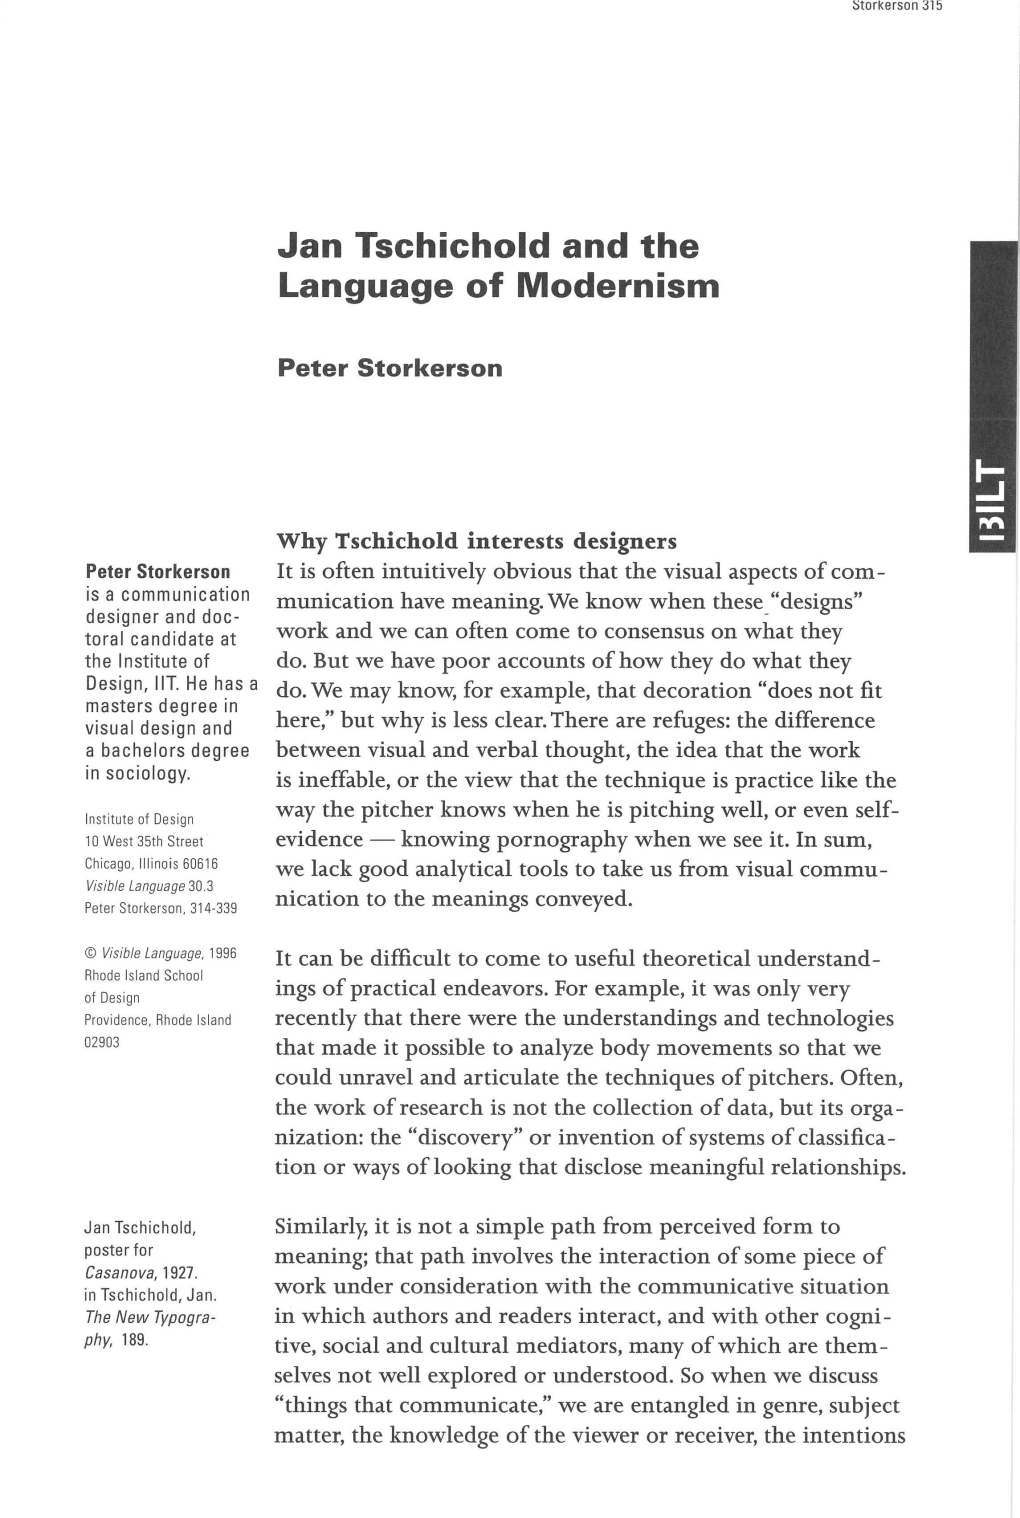 Jan Tschichold and the Language of Modernism